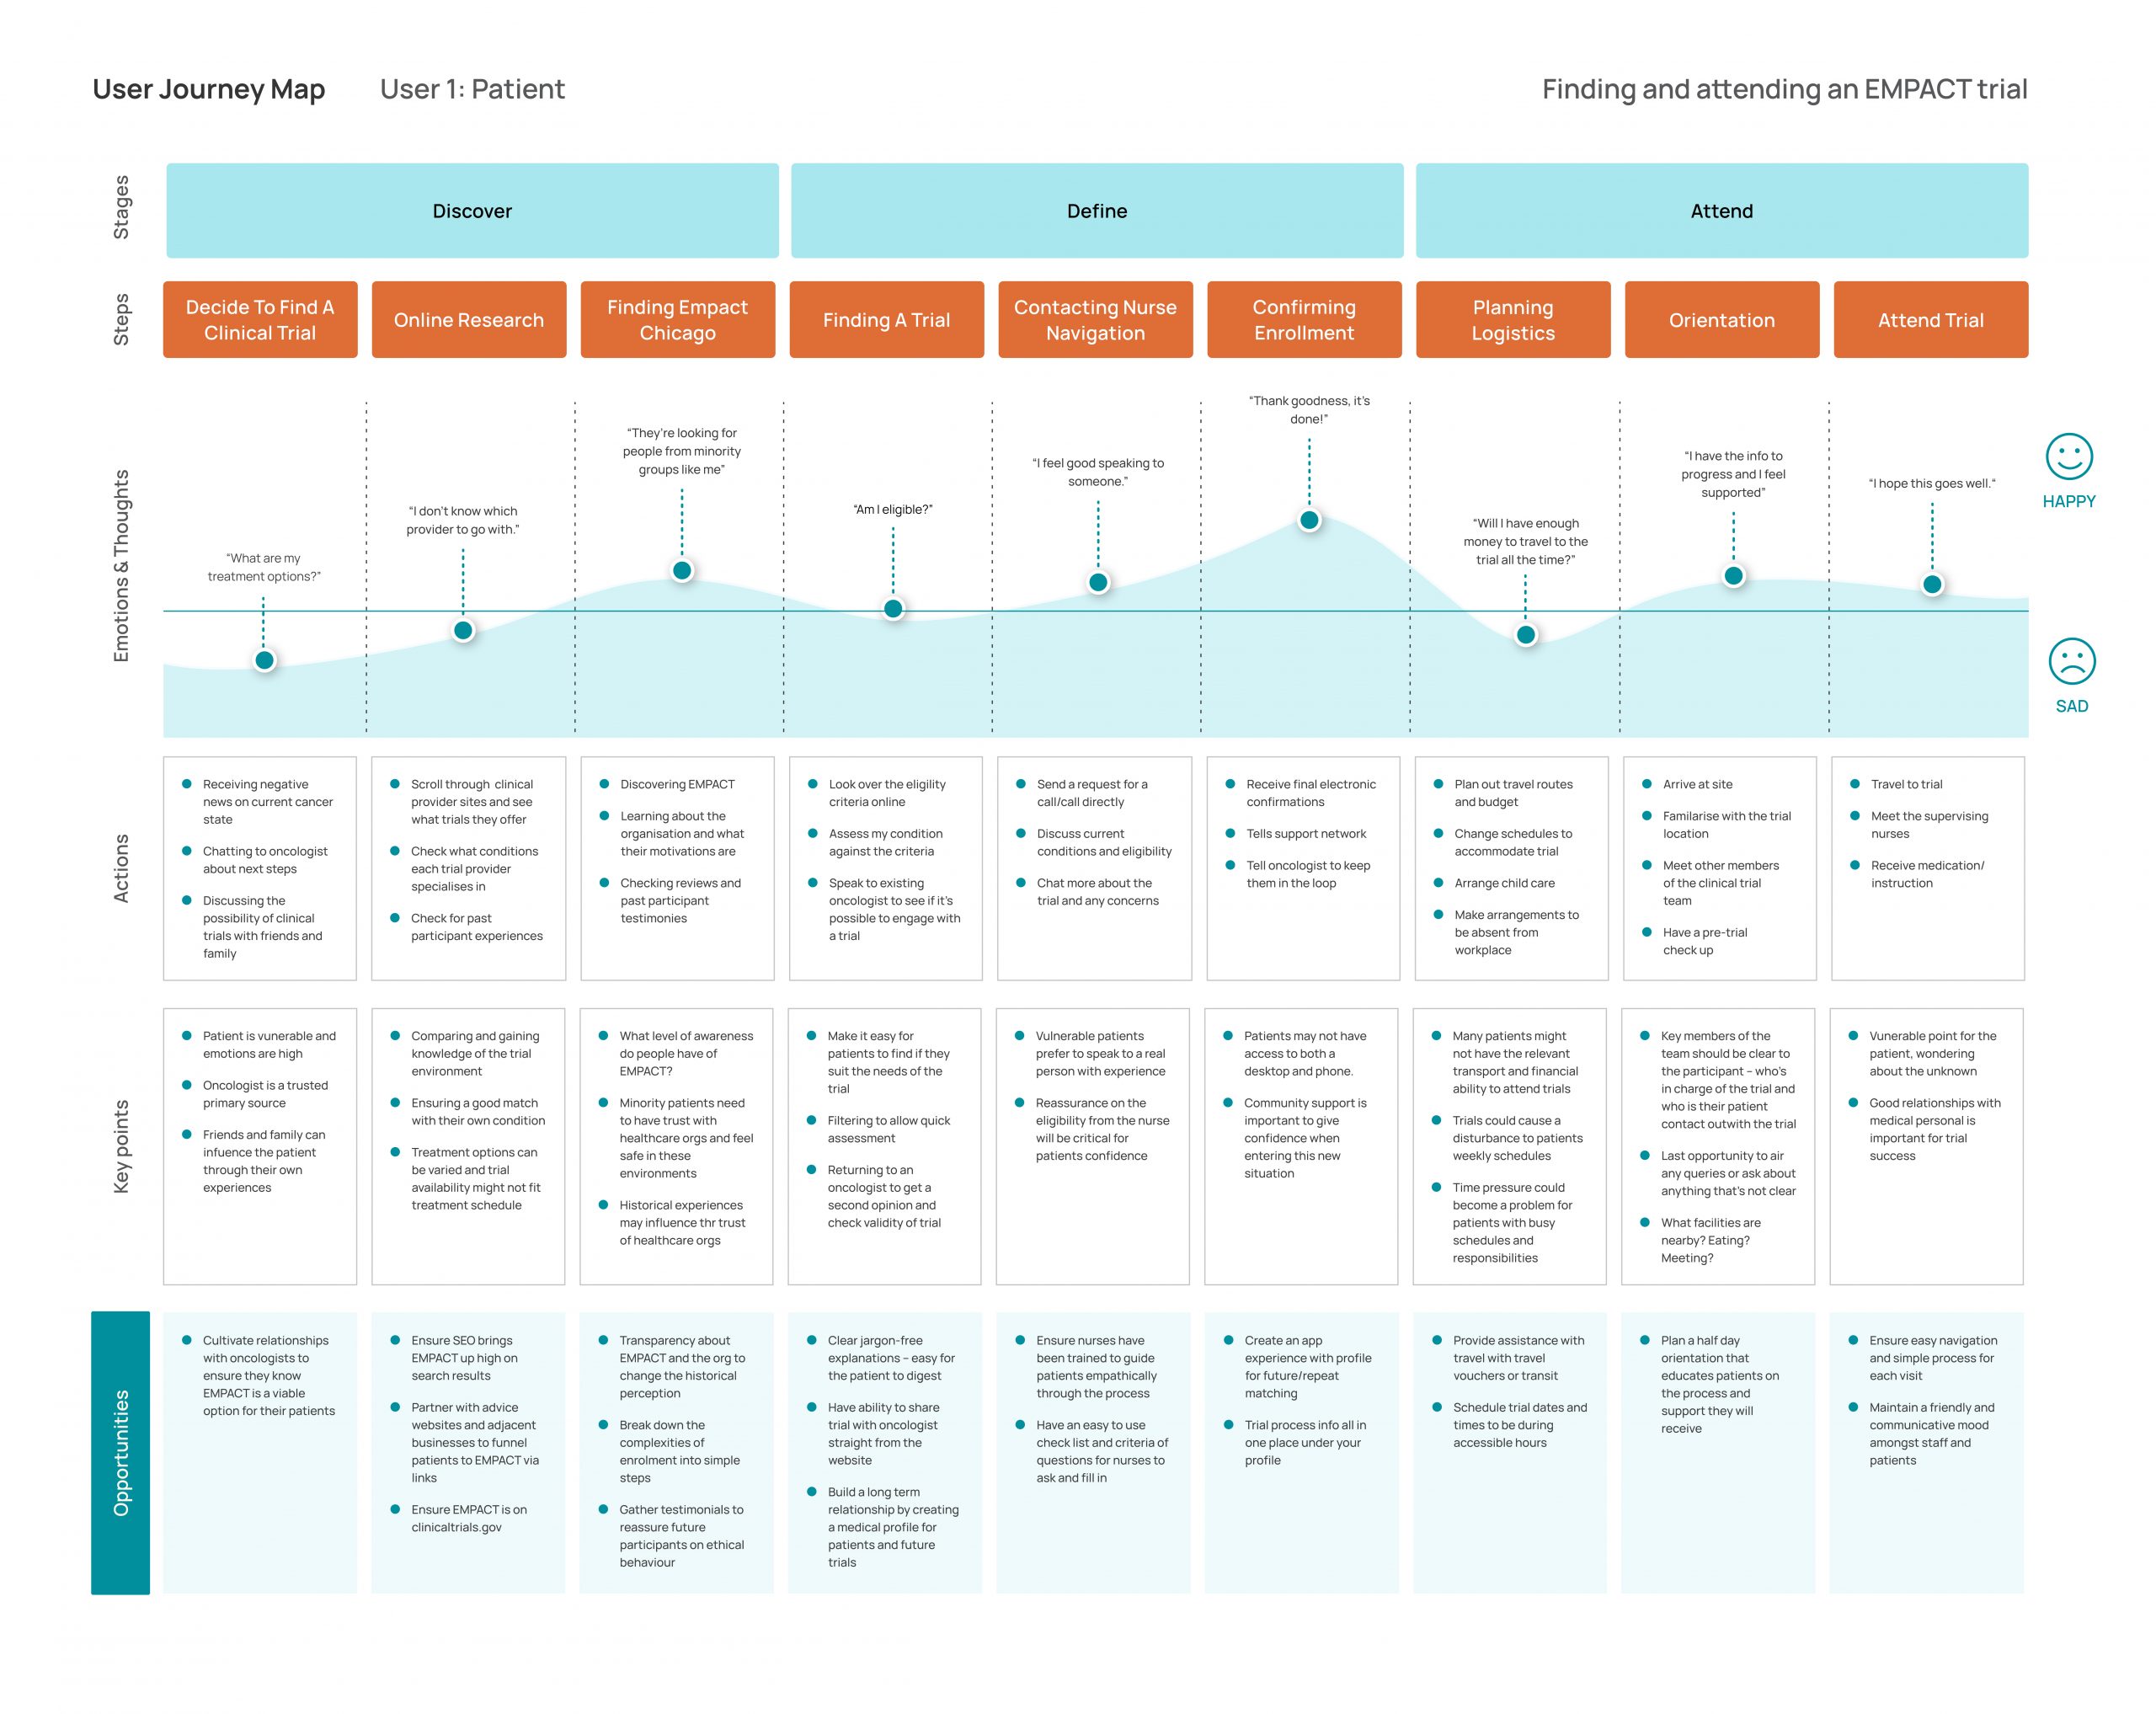 A user journey map focussed on the patient's experience of finding and attending an Empact Chicago trial.